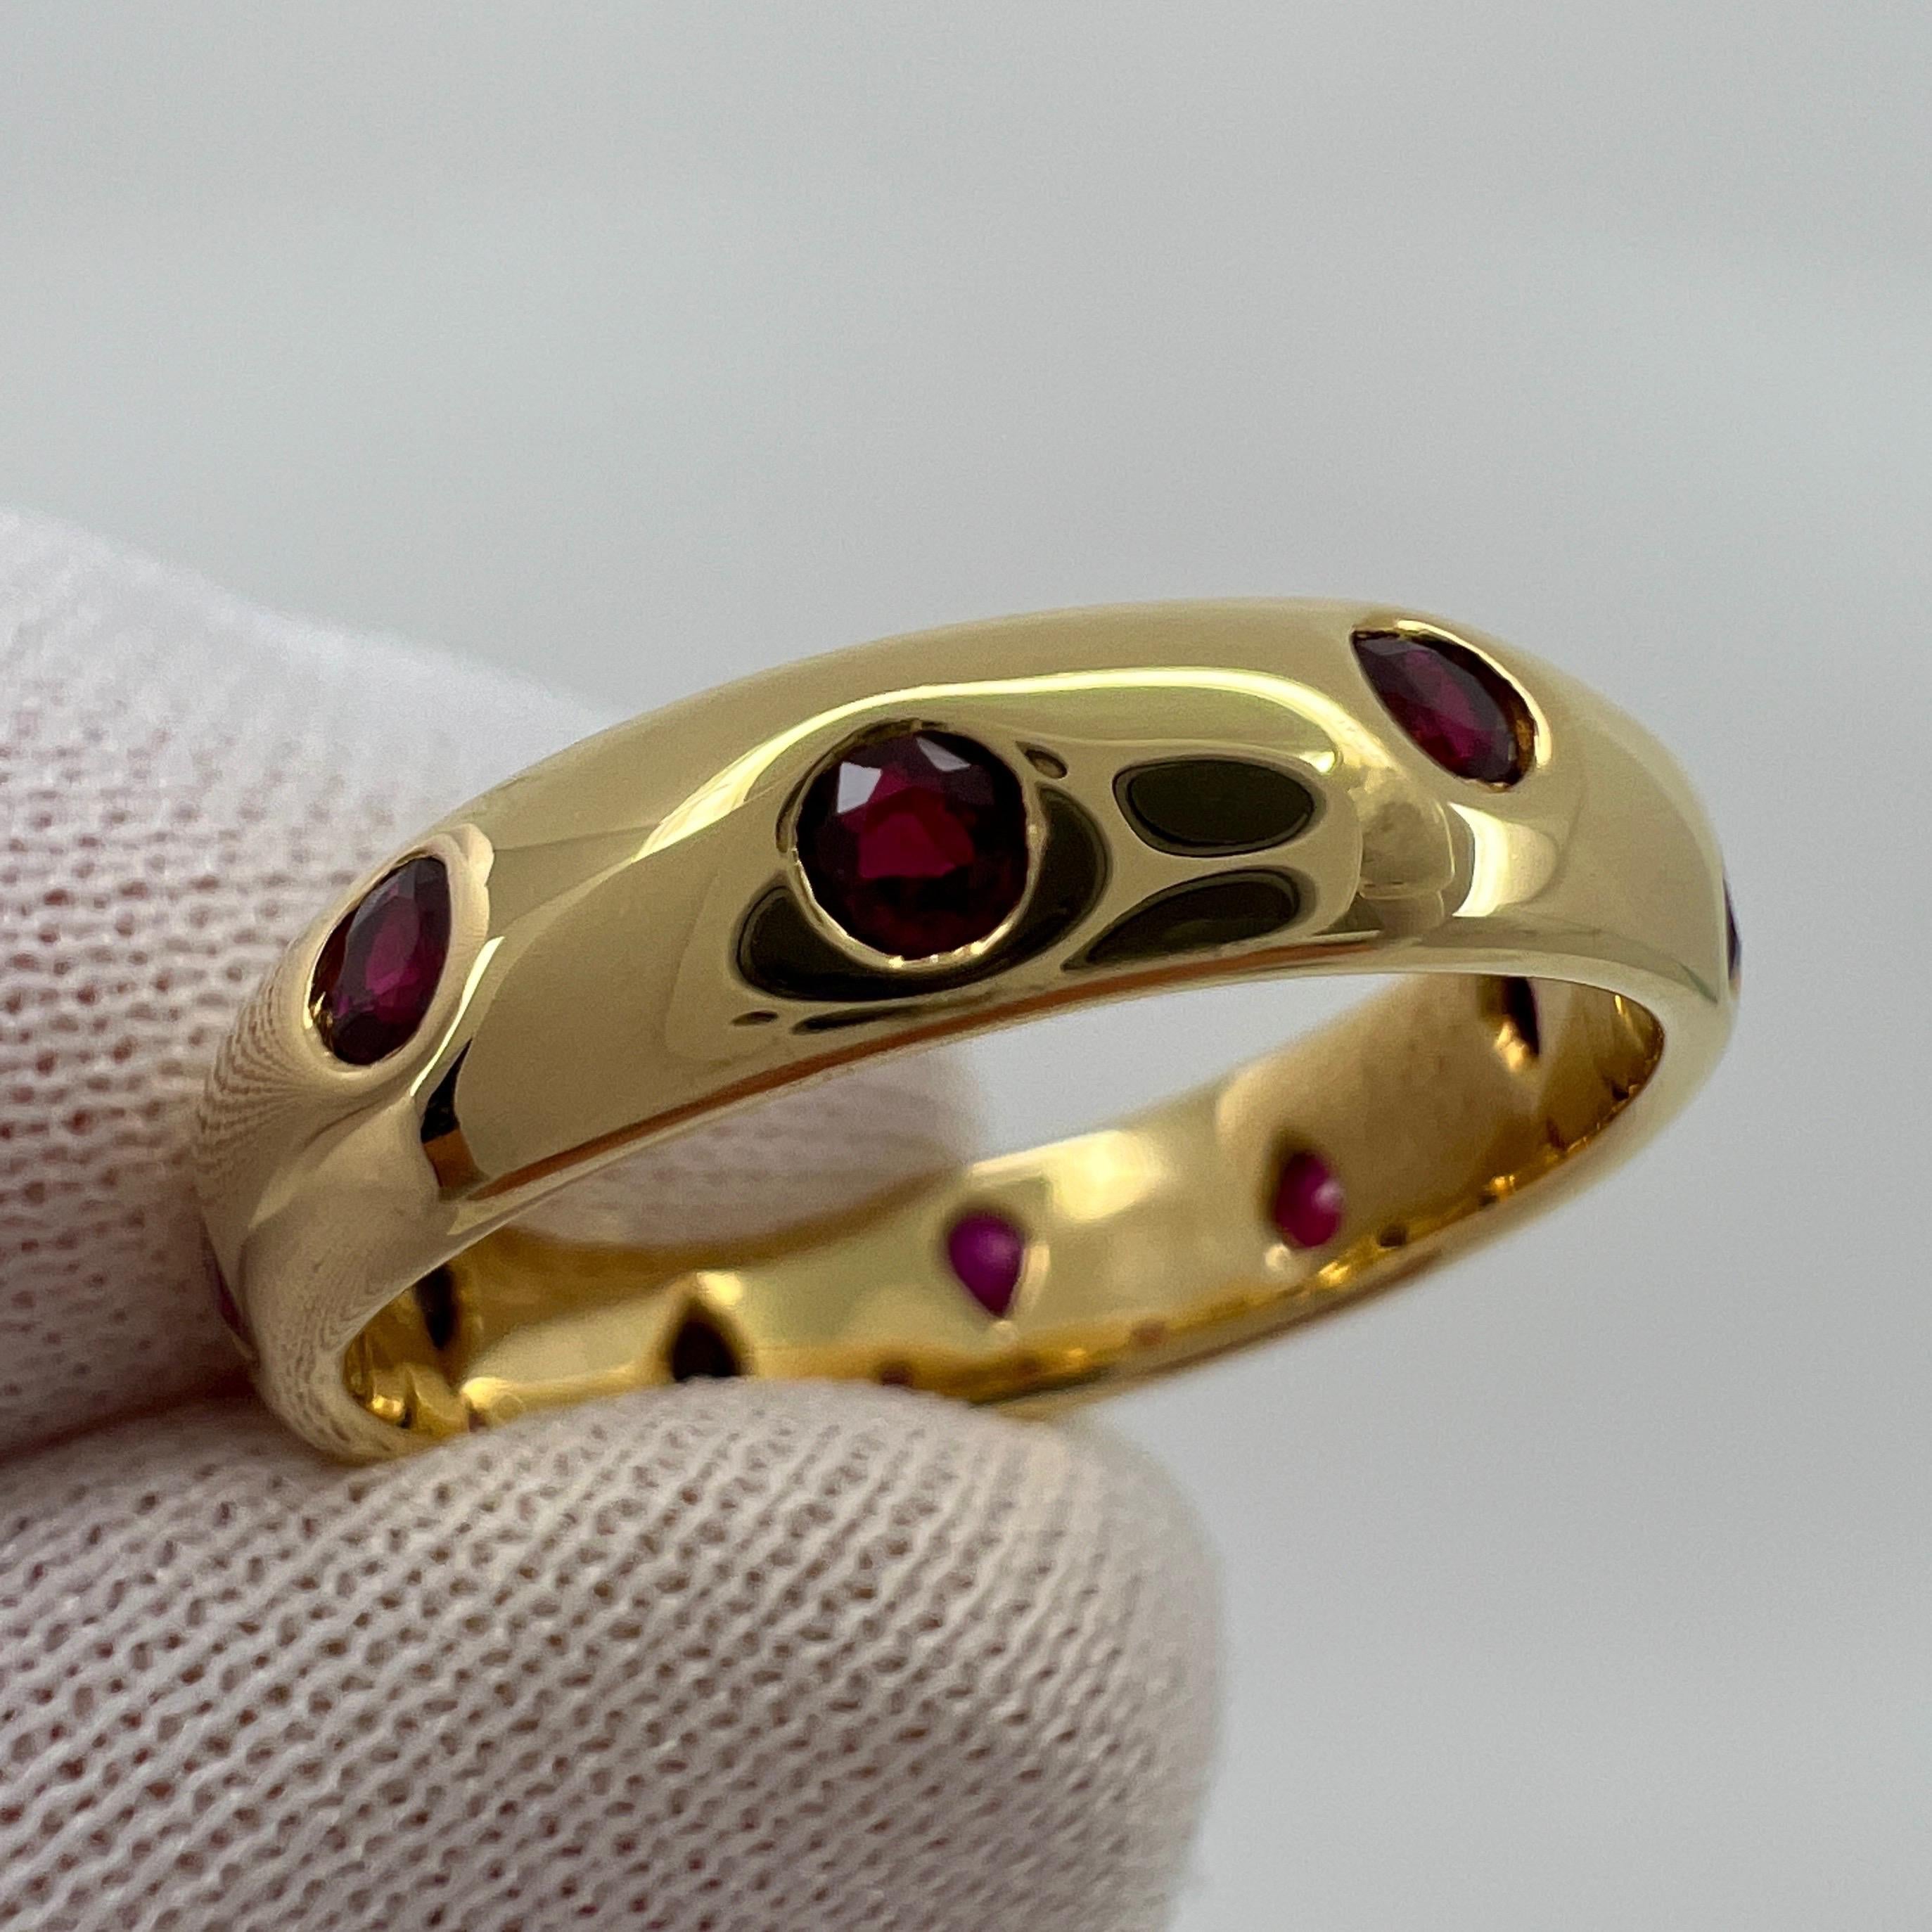 Rare Vintage Tiffany & Co Fine Red Ruby 18k Yellow Gold Etoile Band Ring

Stunning yellow gold ring set with x10 fine deep red round cut natural rubies.

Fine jewellery houses like Tiffany only use the finest gemstones in their jewellery and this